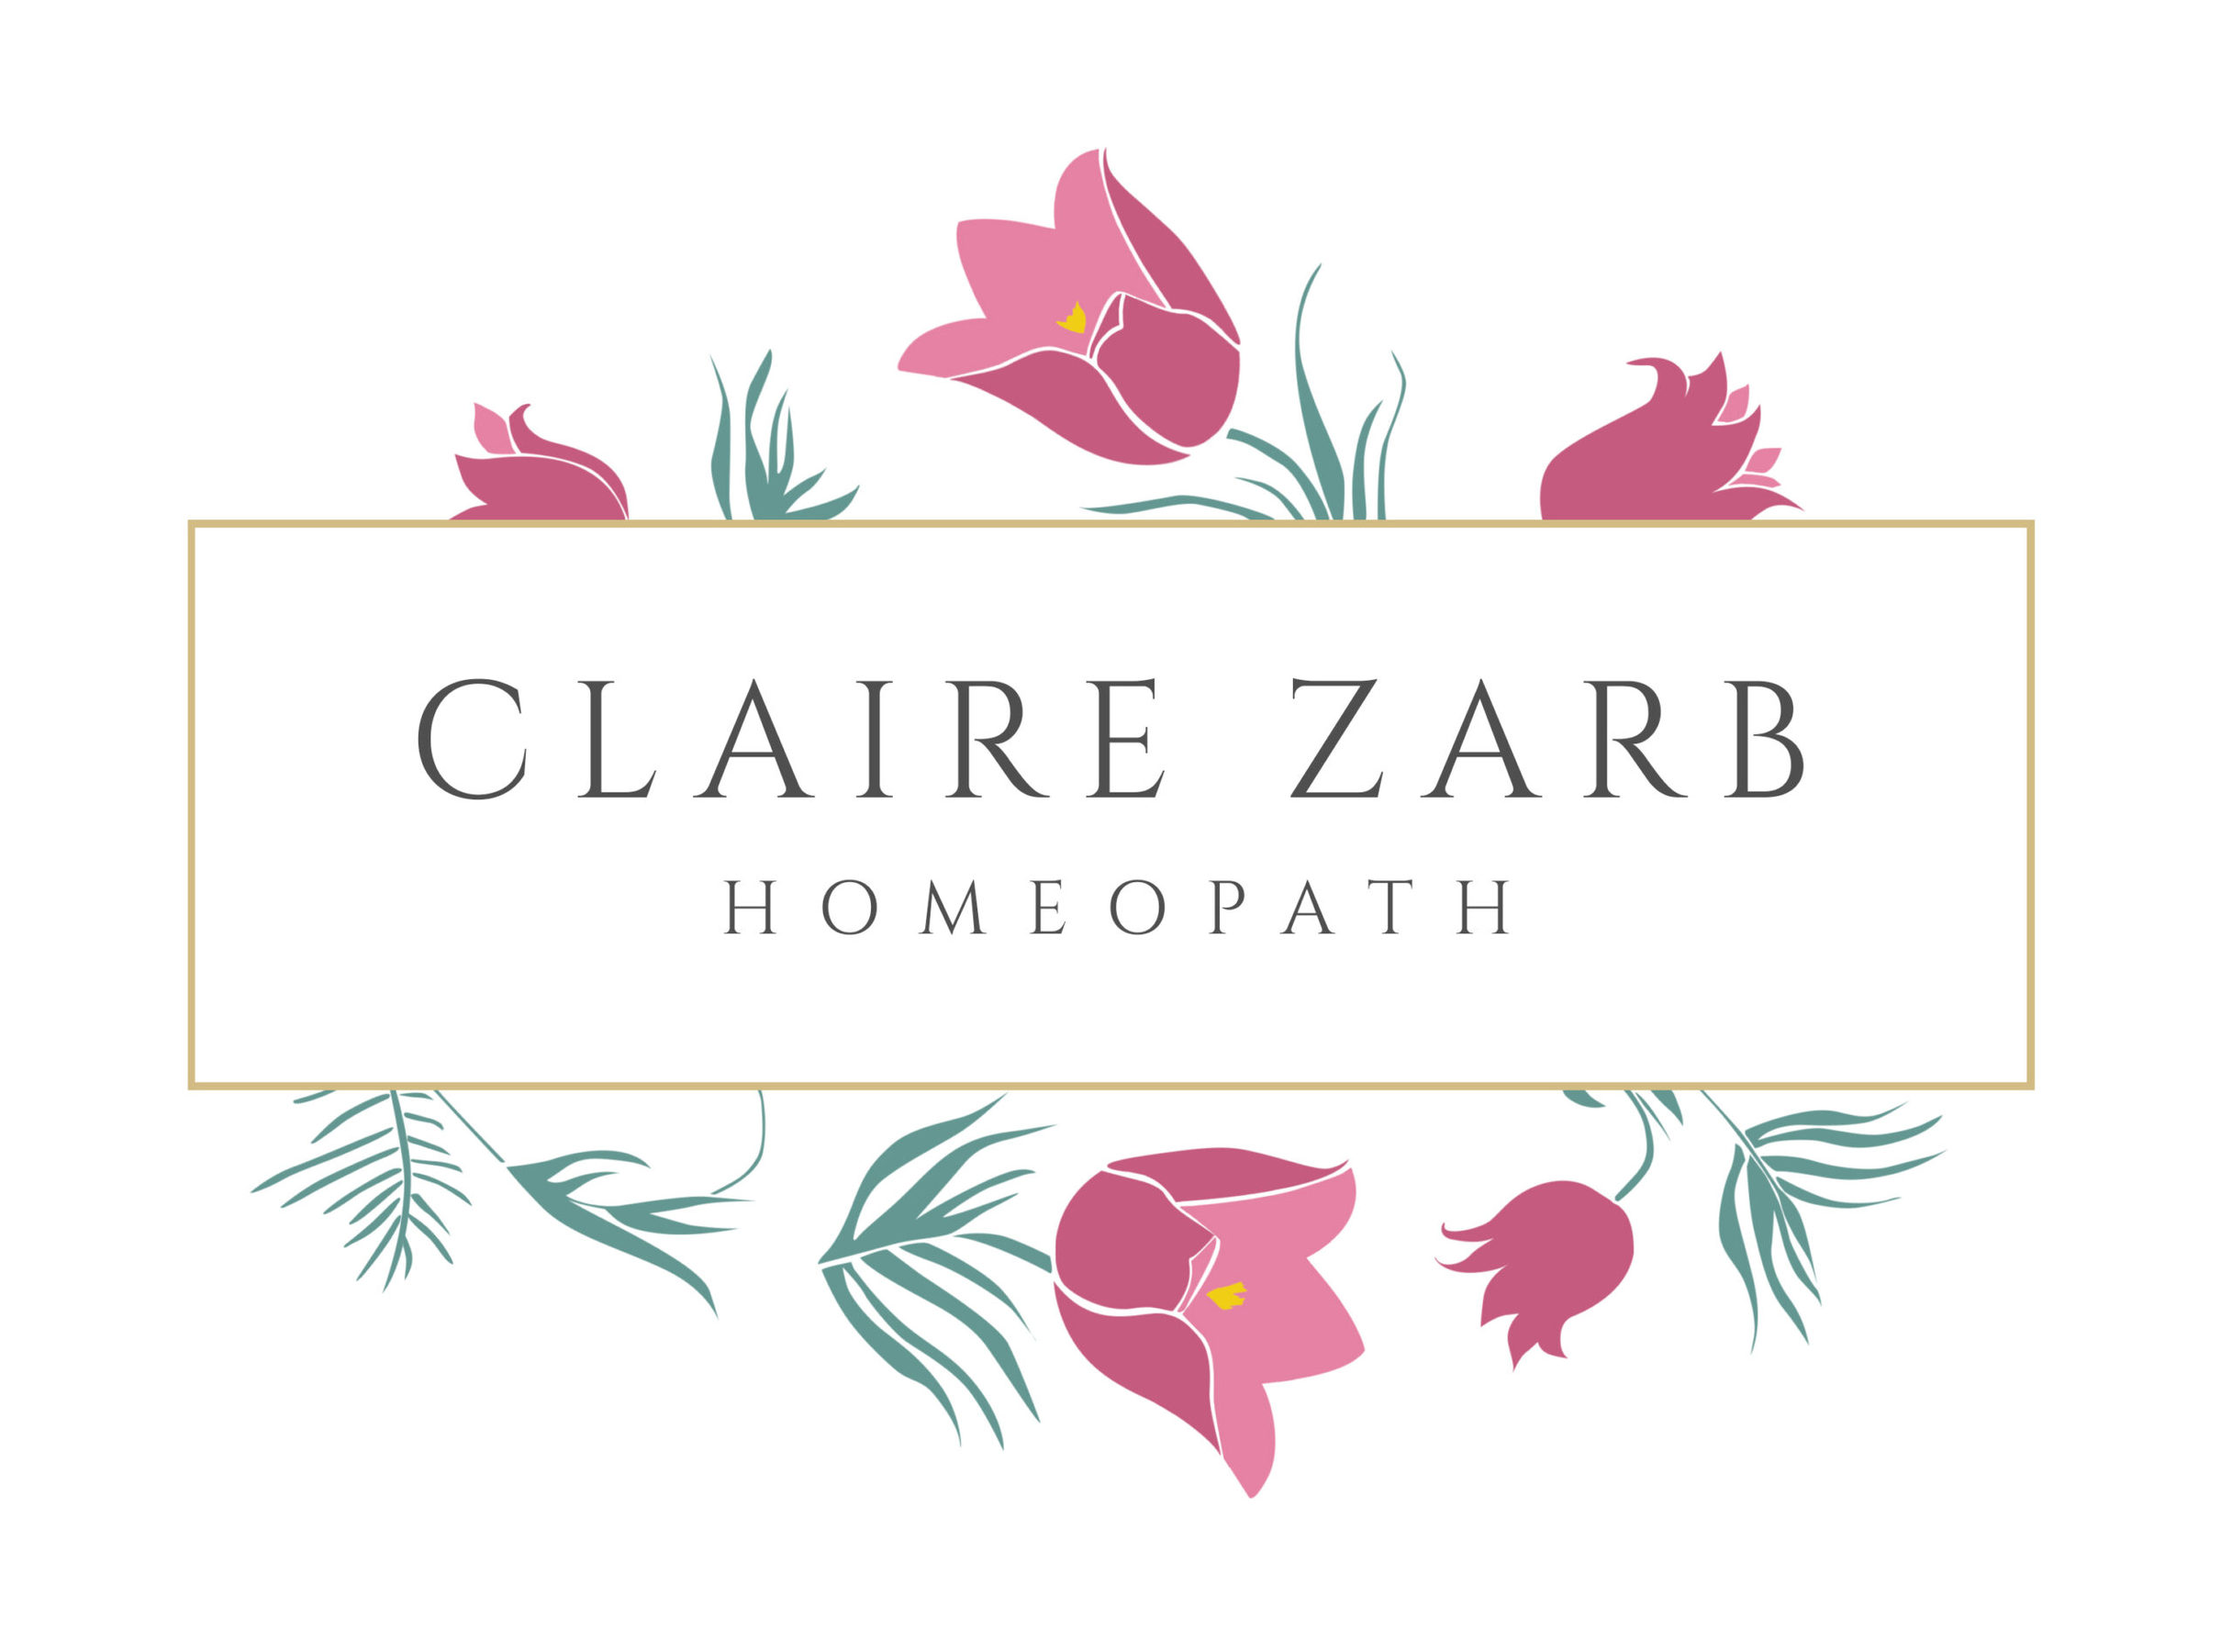 Claire Zarb - Homeopath